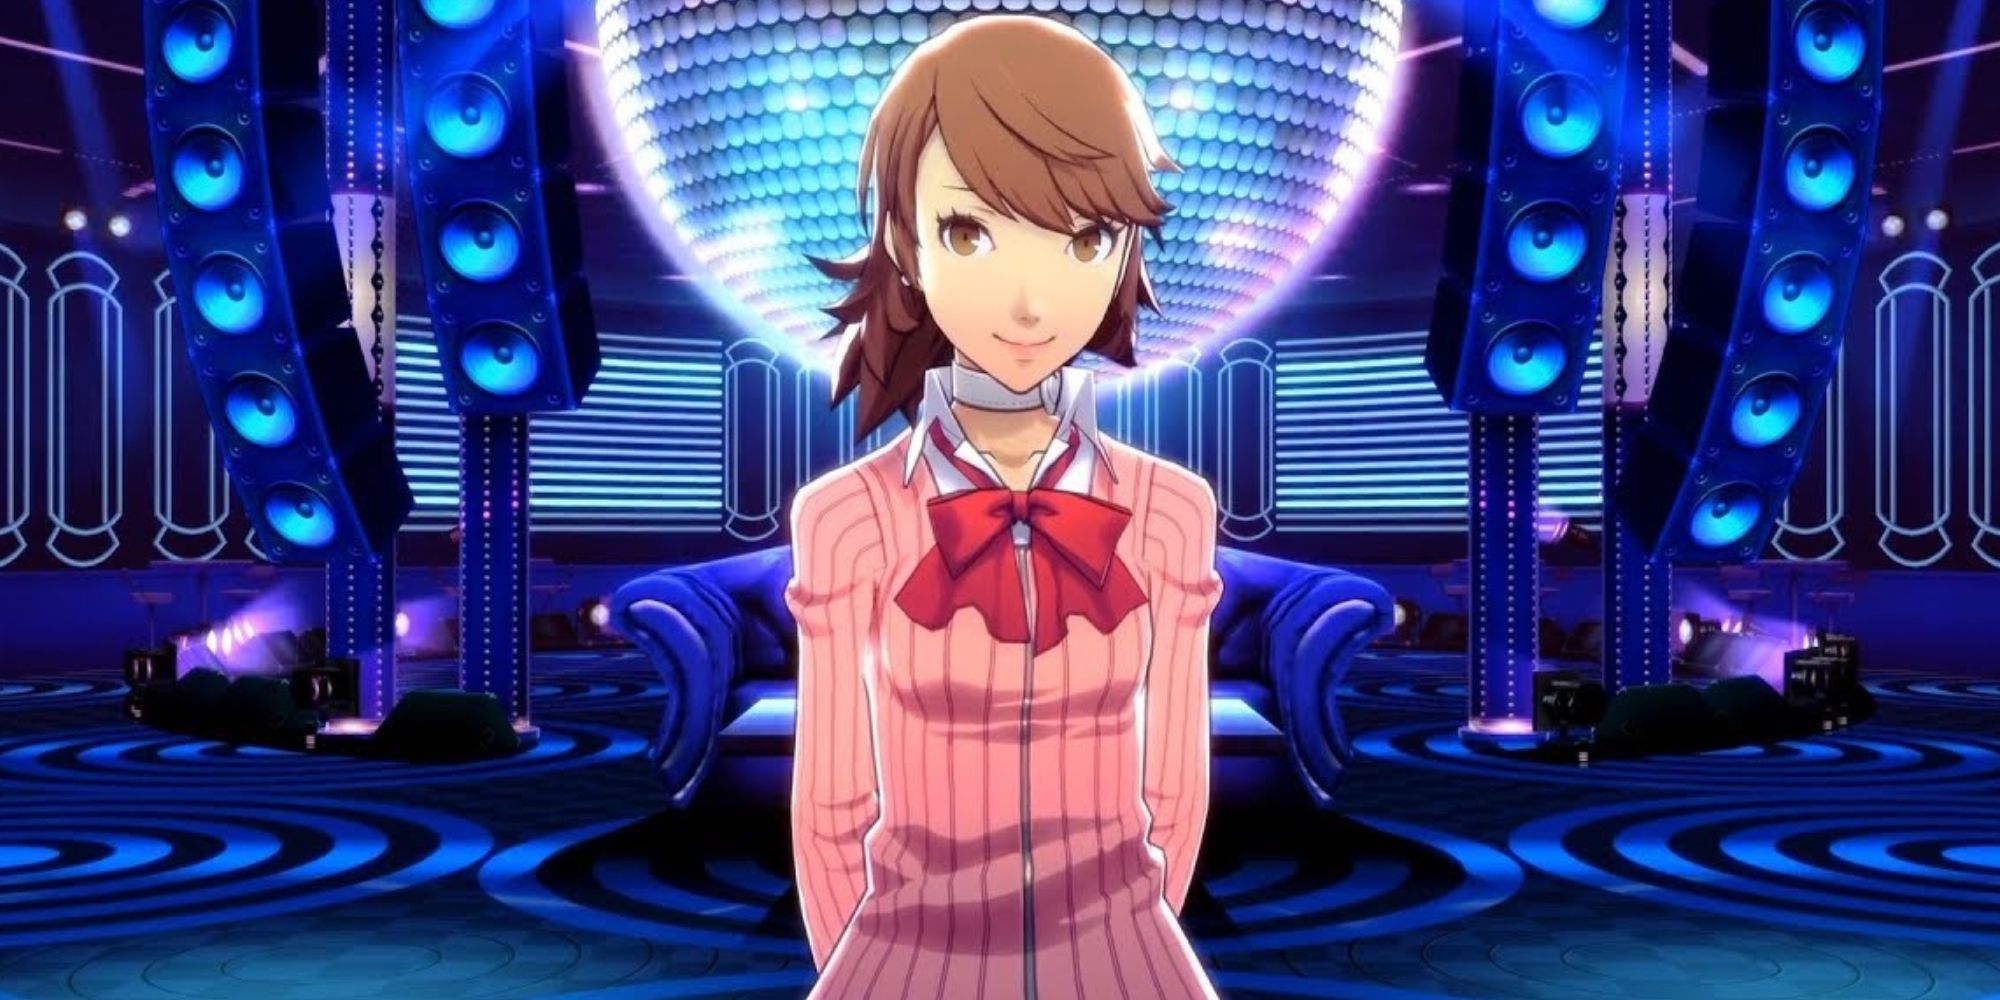 a shot of Yukari Takeba from Persona 3 Dancing In Moonlight against a backdrop of a club and large mirror balls